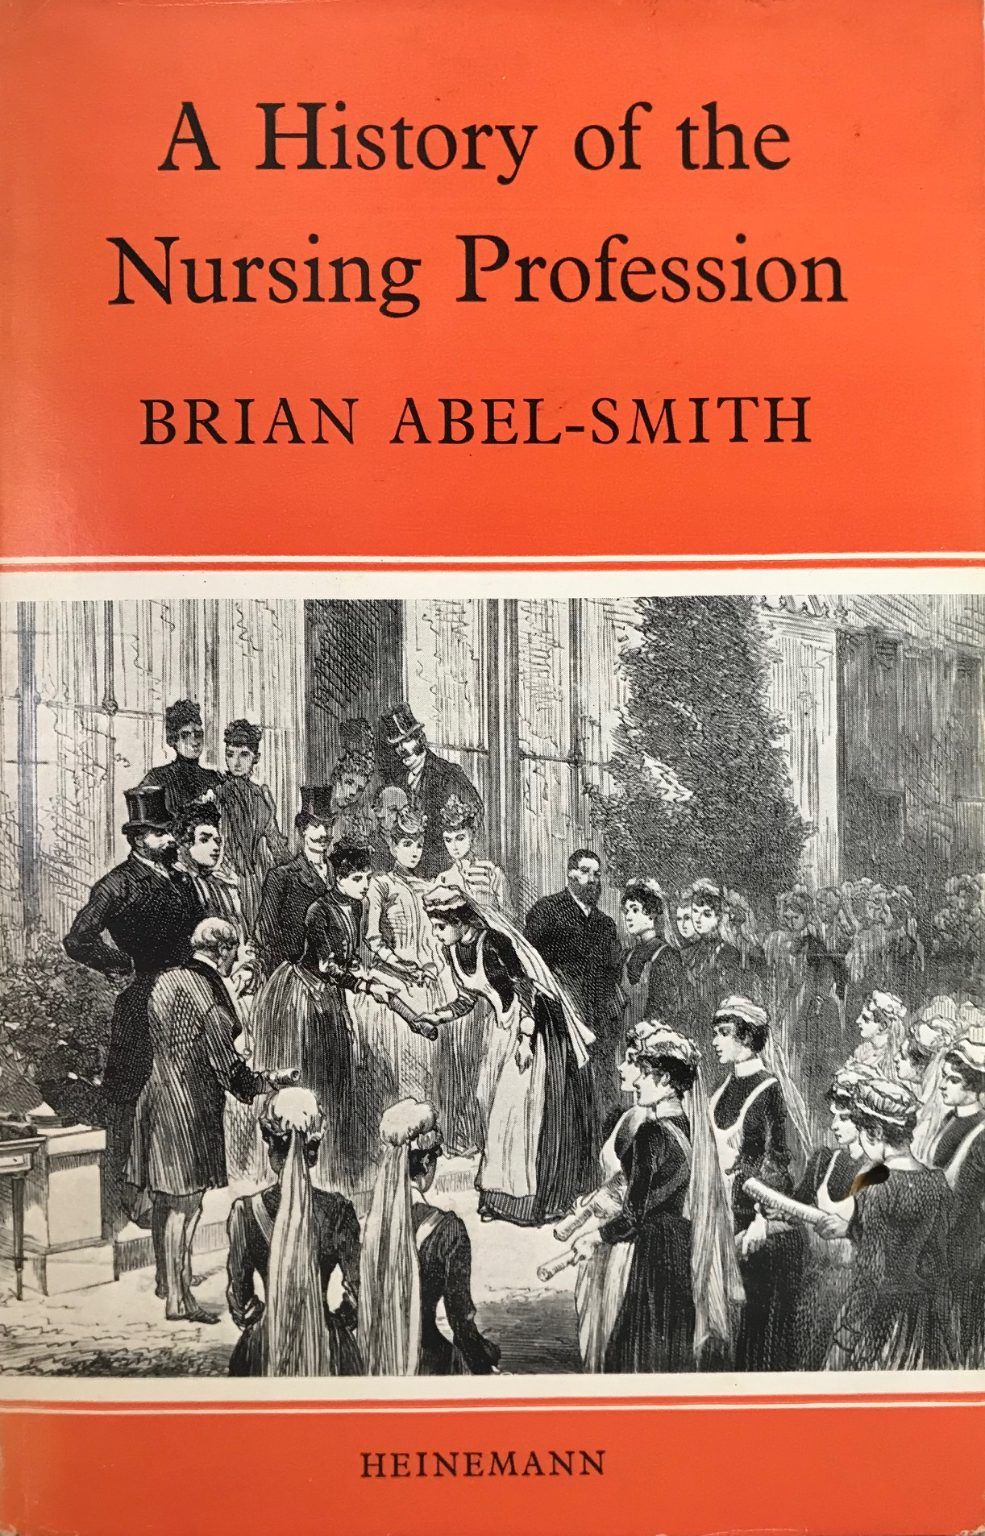 A HISTORY OF THE NURSING PROFESSION